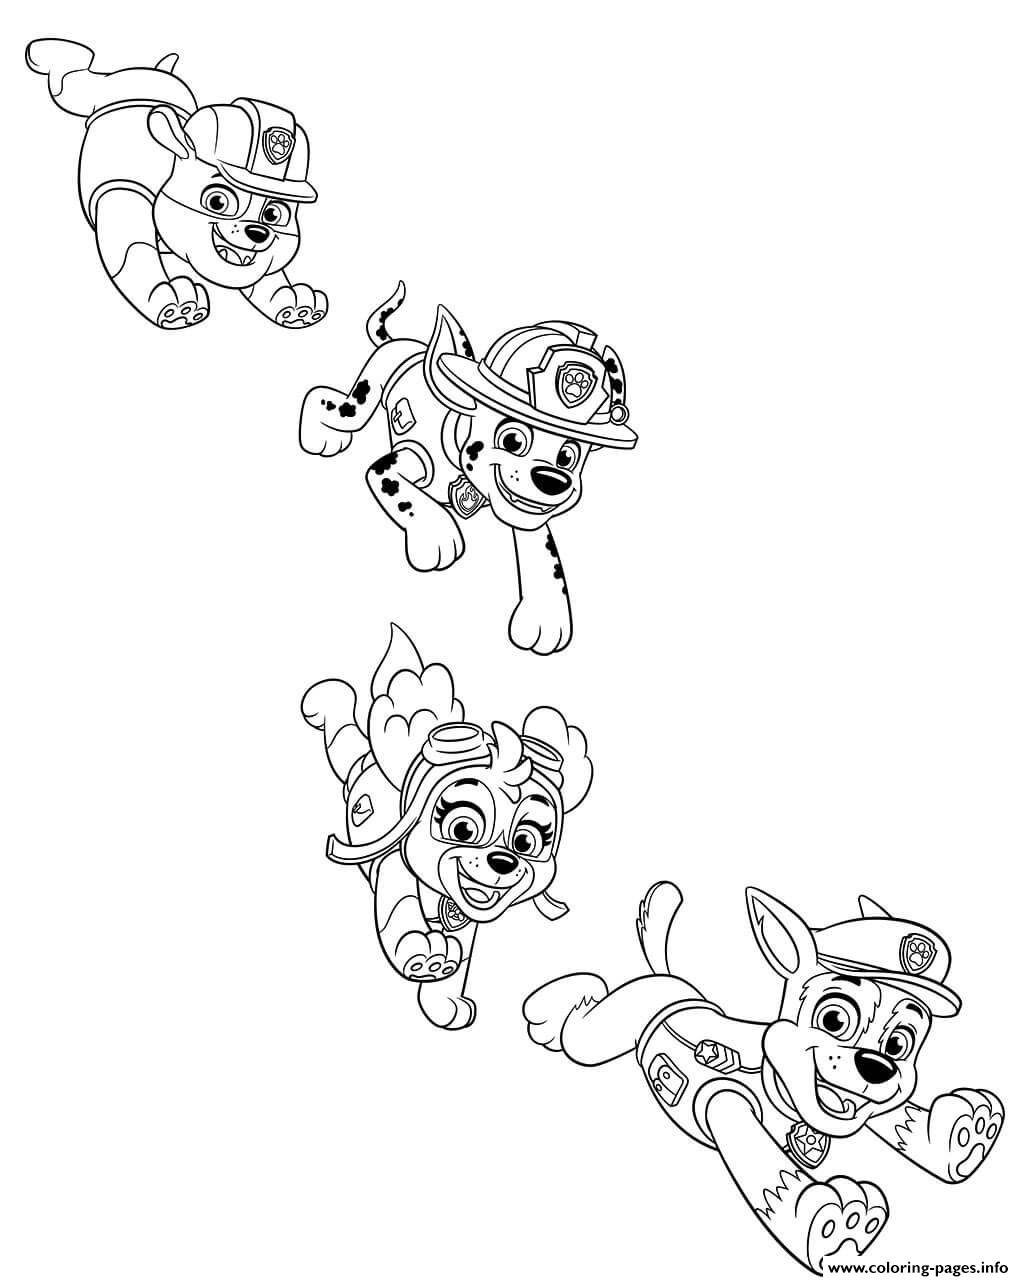 Paw Patrol Coloring Pages FREE Printable 12